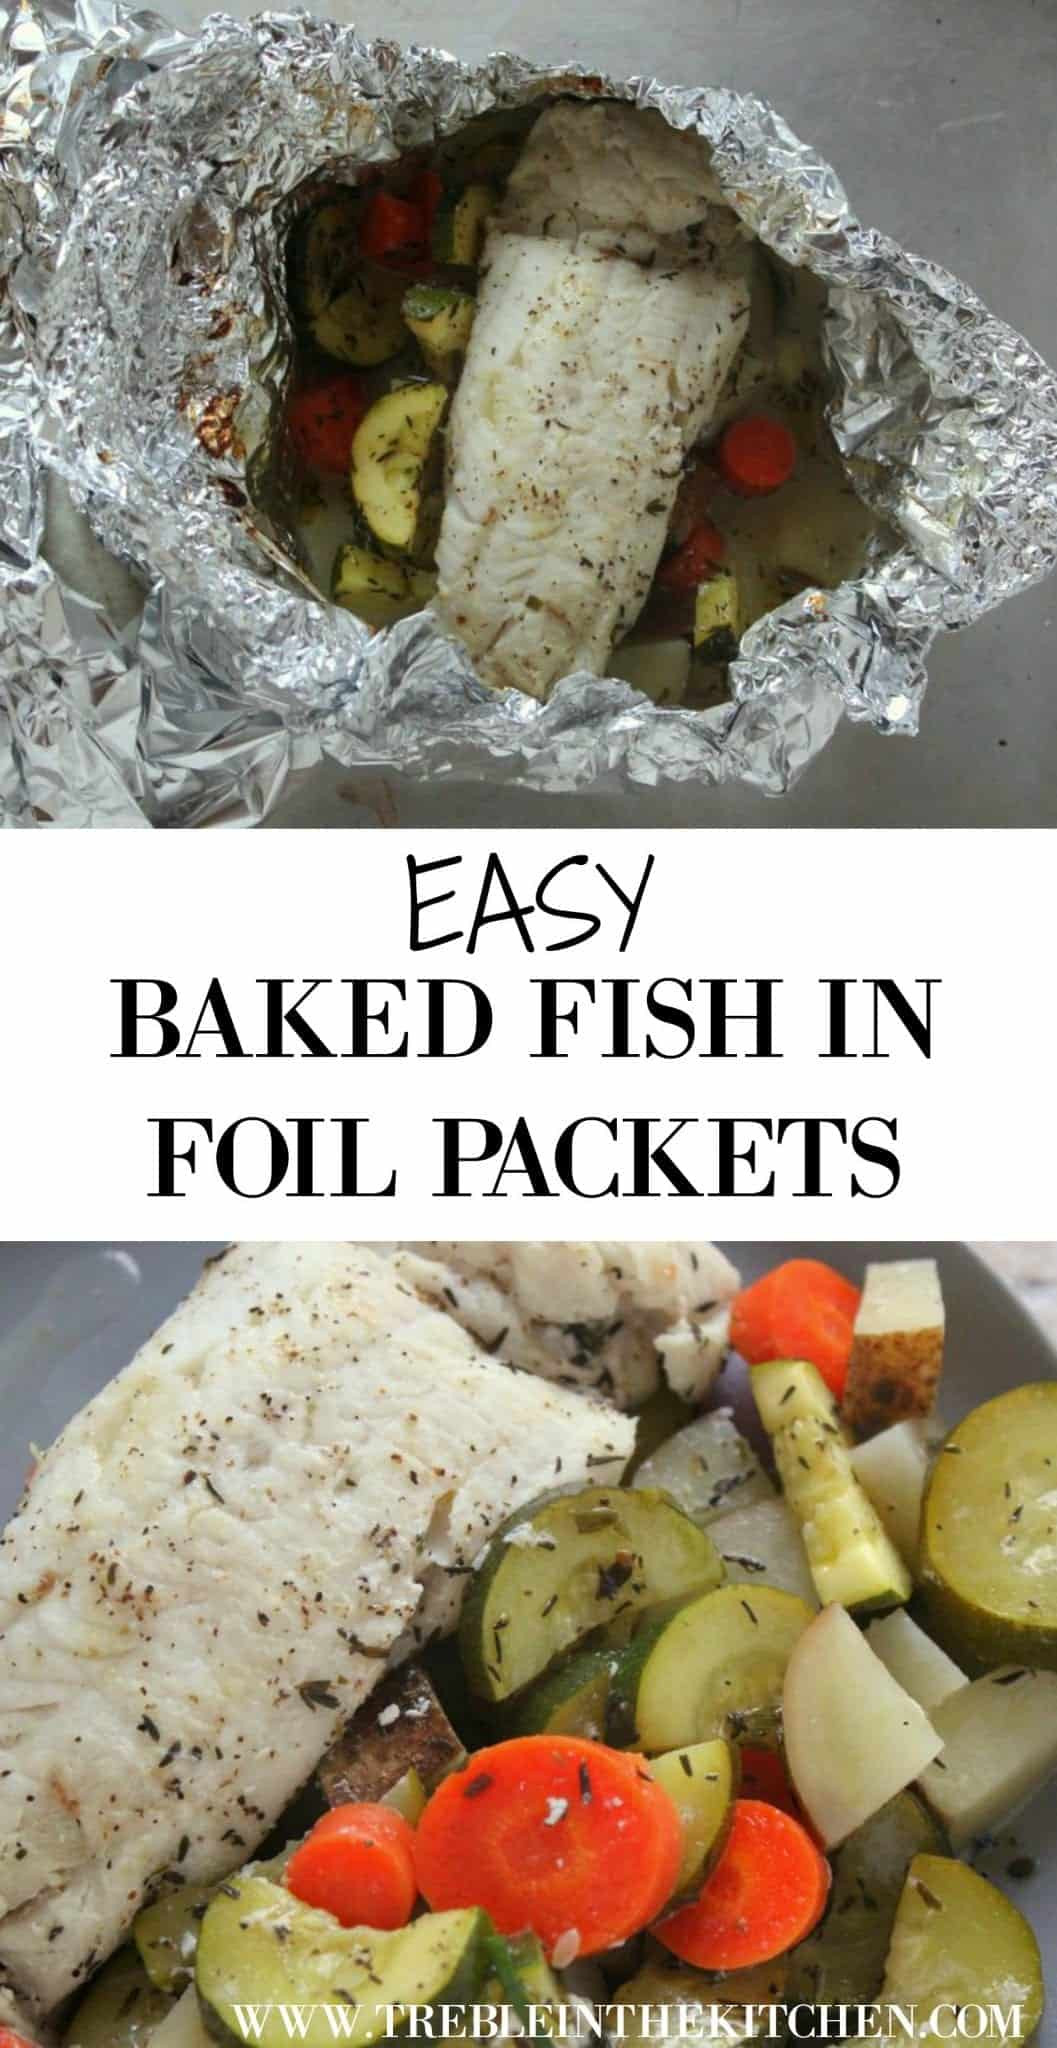 Fish In Foil Packets Recipes
 Easy Baked Fish in Foil Packets Tara Rochford Nutrition